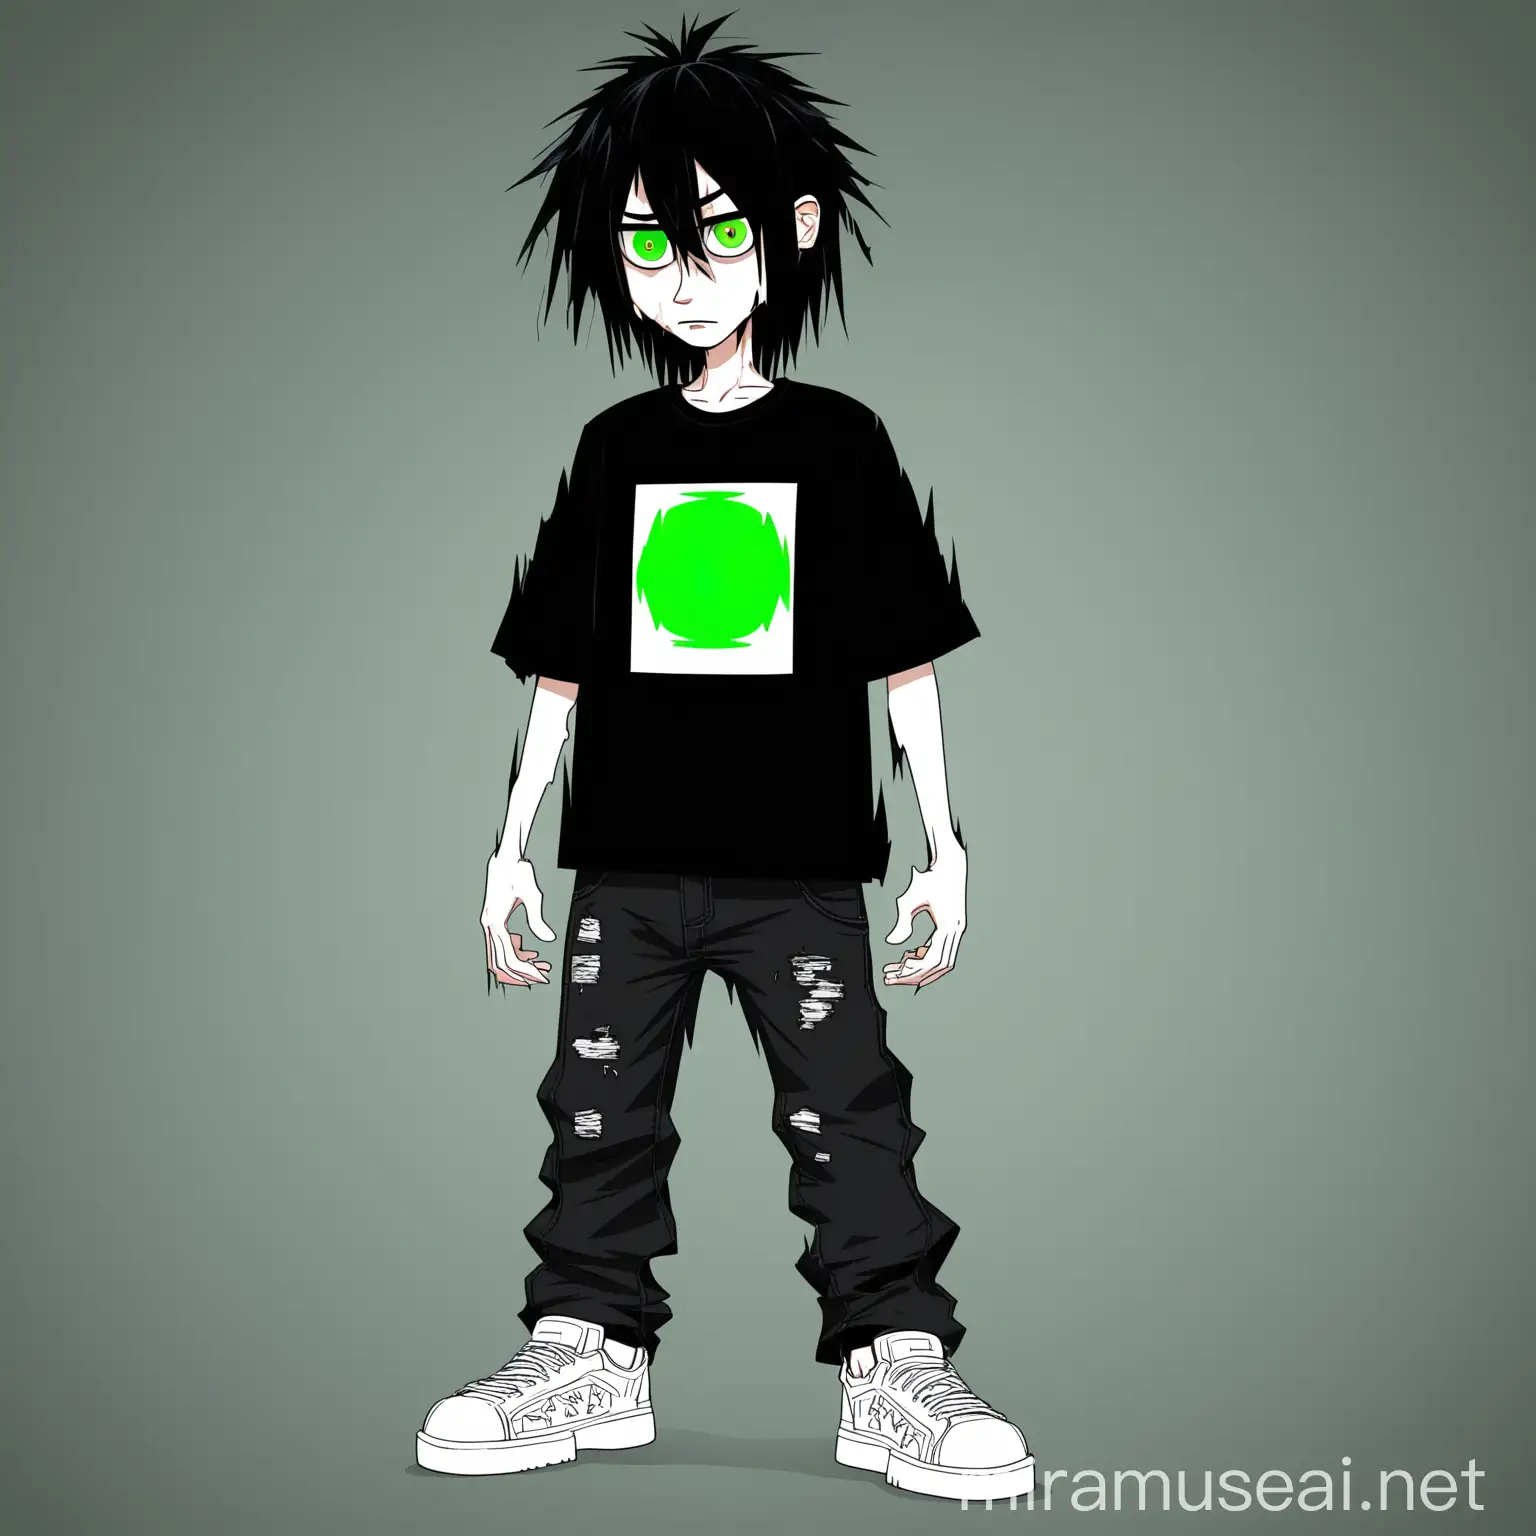 The cartoon depicts an emo boy, in the "T" position and in full height, wearing black baggy jeans and white low-top sneakers and a black oversize T-shirt. He has long dark hair, disheveled and unkempt, green eyes.do this in the form of a cartoon small polygonal 3D character in full height (the head is smoother and larger).
